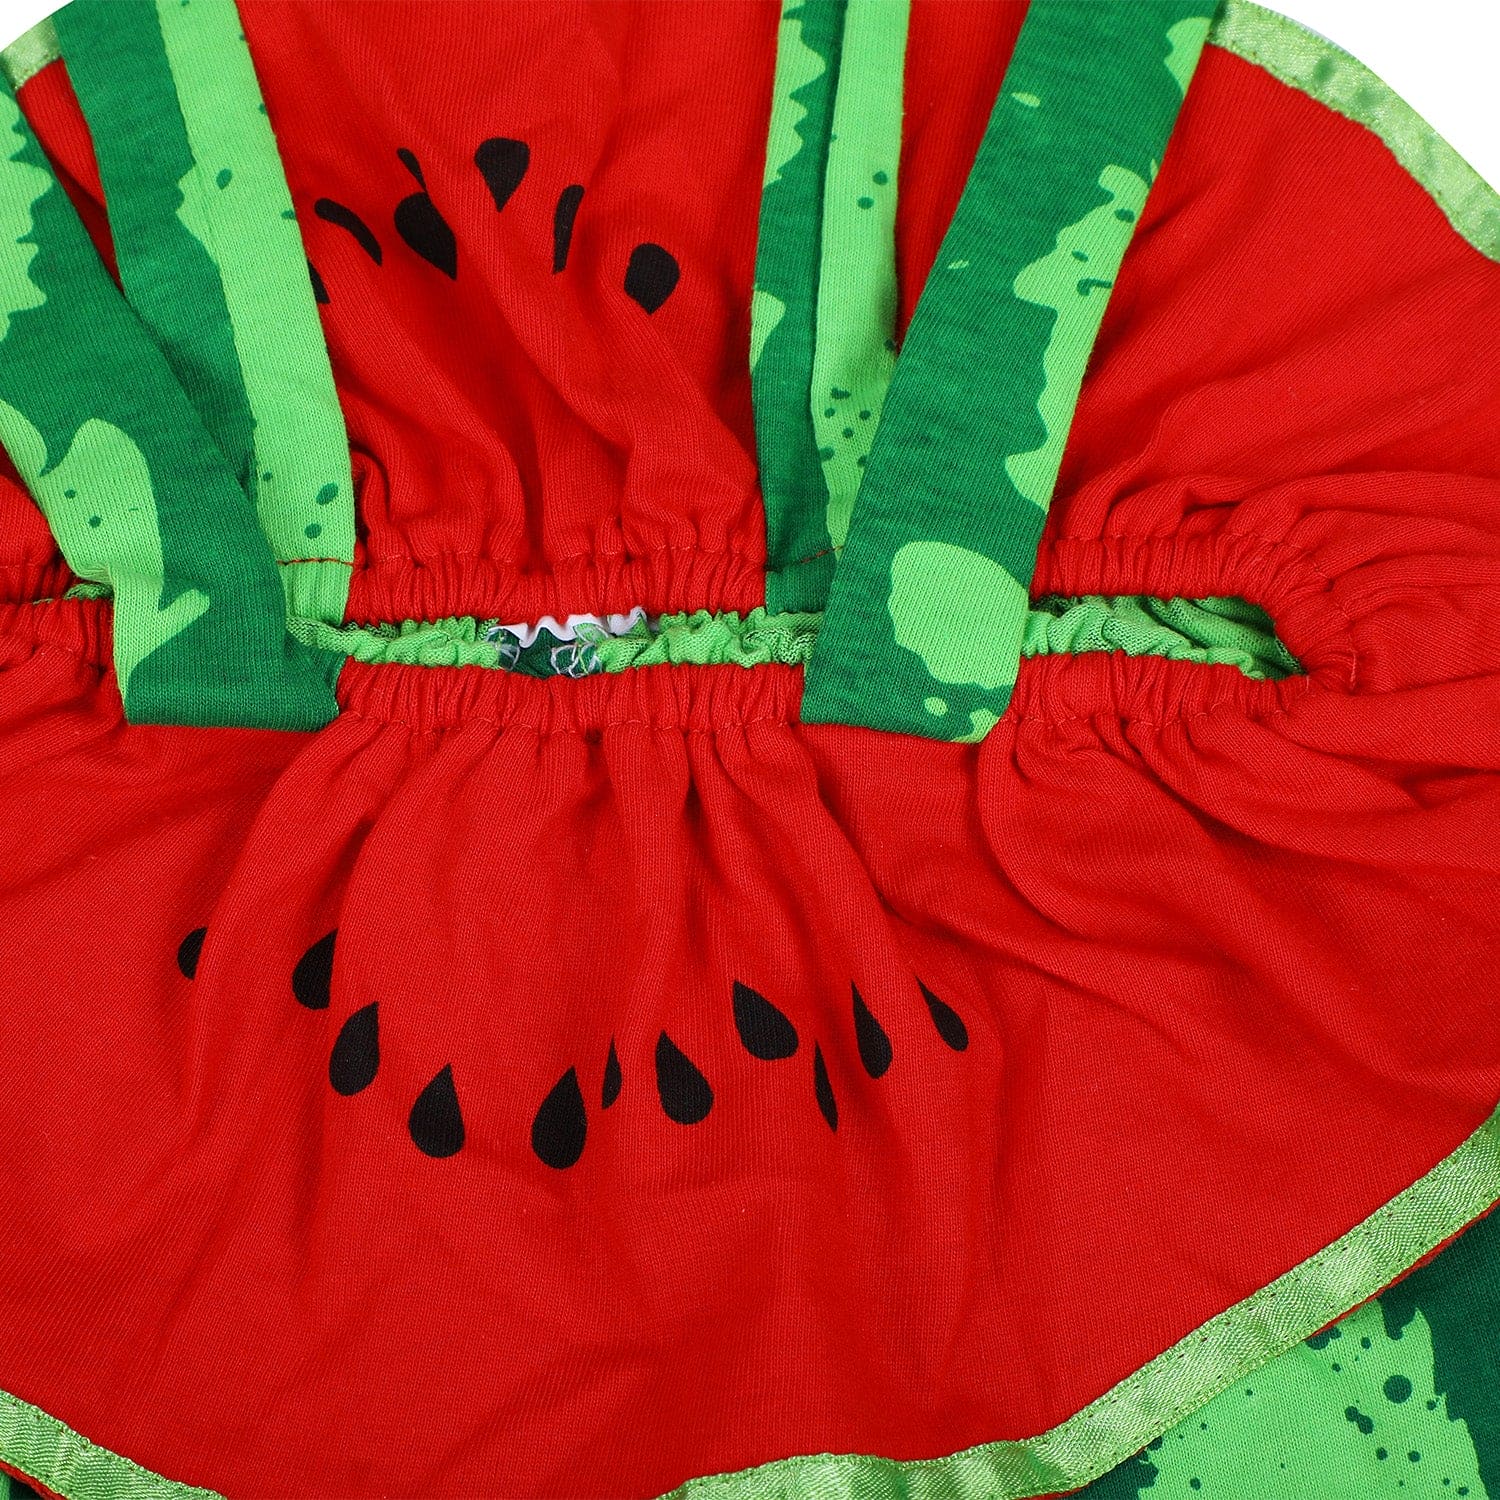 Buy ITSMYCOSTUME Watermelon Fruit Kids Fancy Dress Costume - (Material:  American Silk) Size 9-11 Years Online at Low Prices in India - Amazon.in